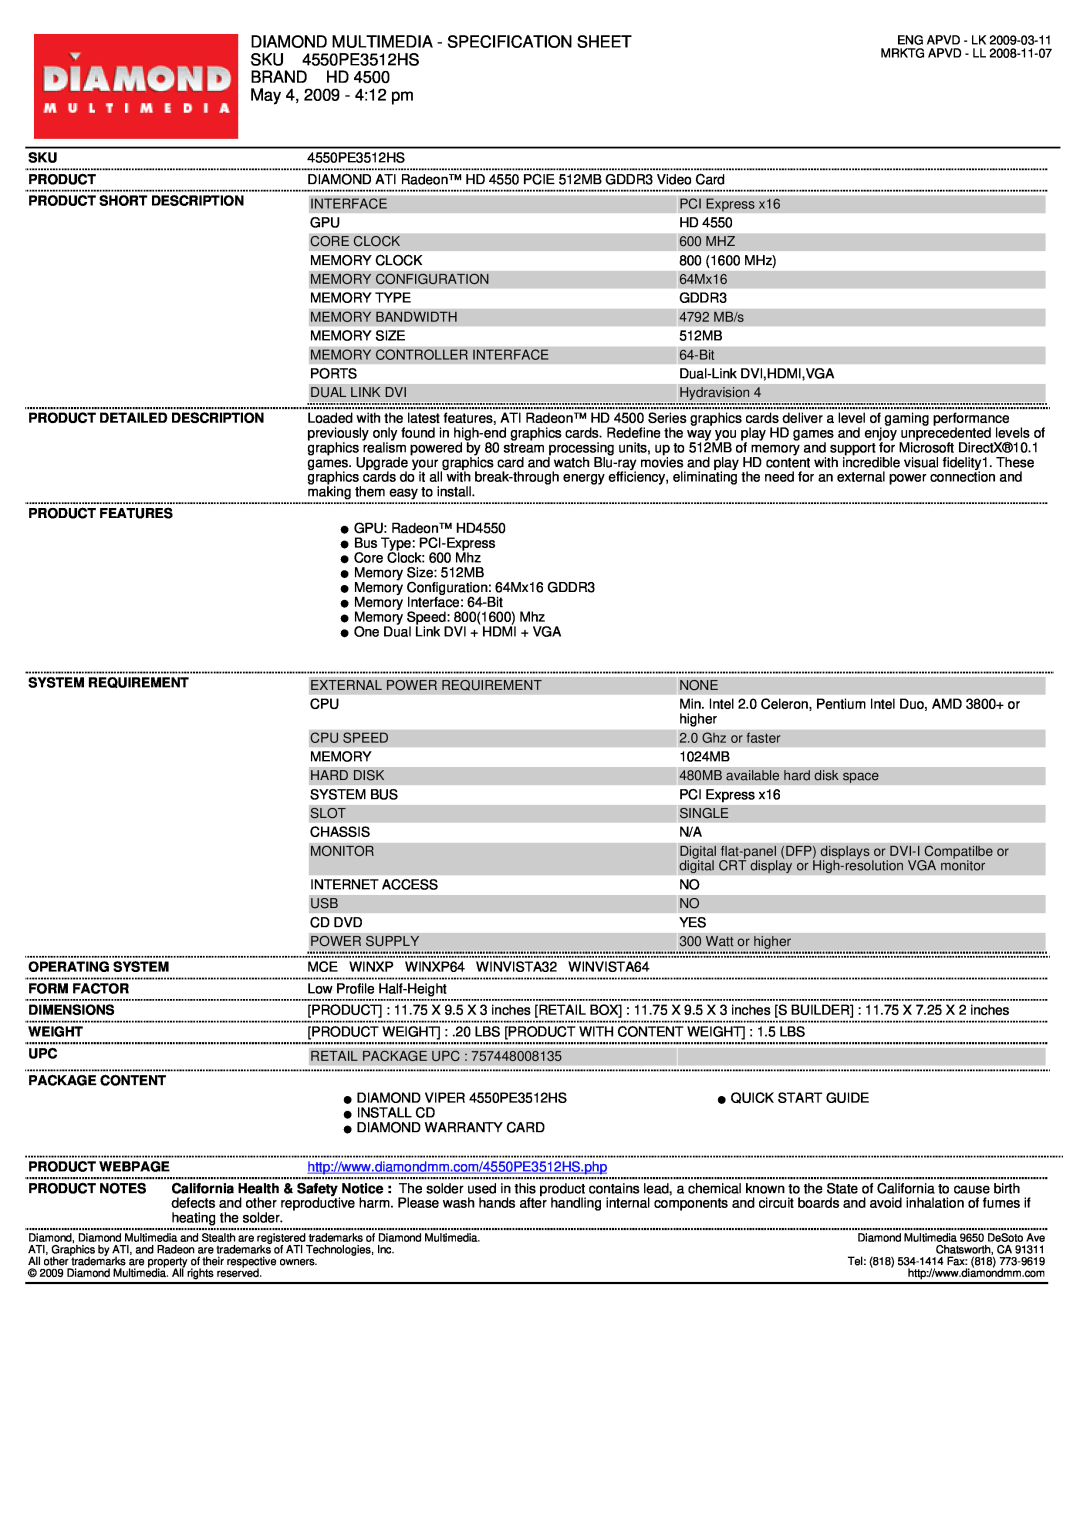 Diamond Multimedia HD 4550 PCIE specifications Diamond Multimedia - Specification Sheet, 4550PE3512HS, Brand Hd, Product 